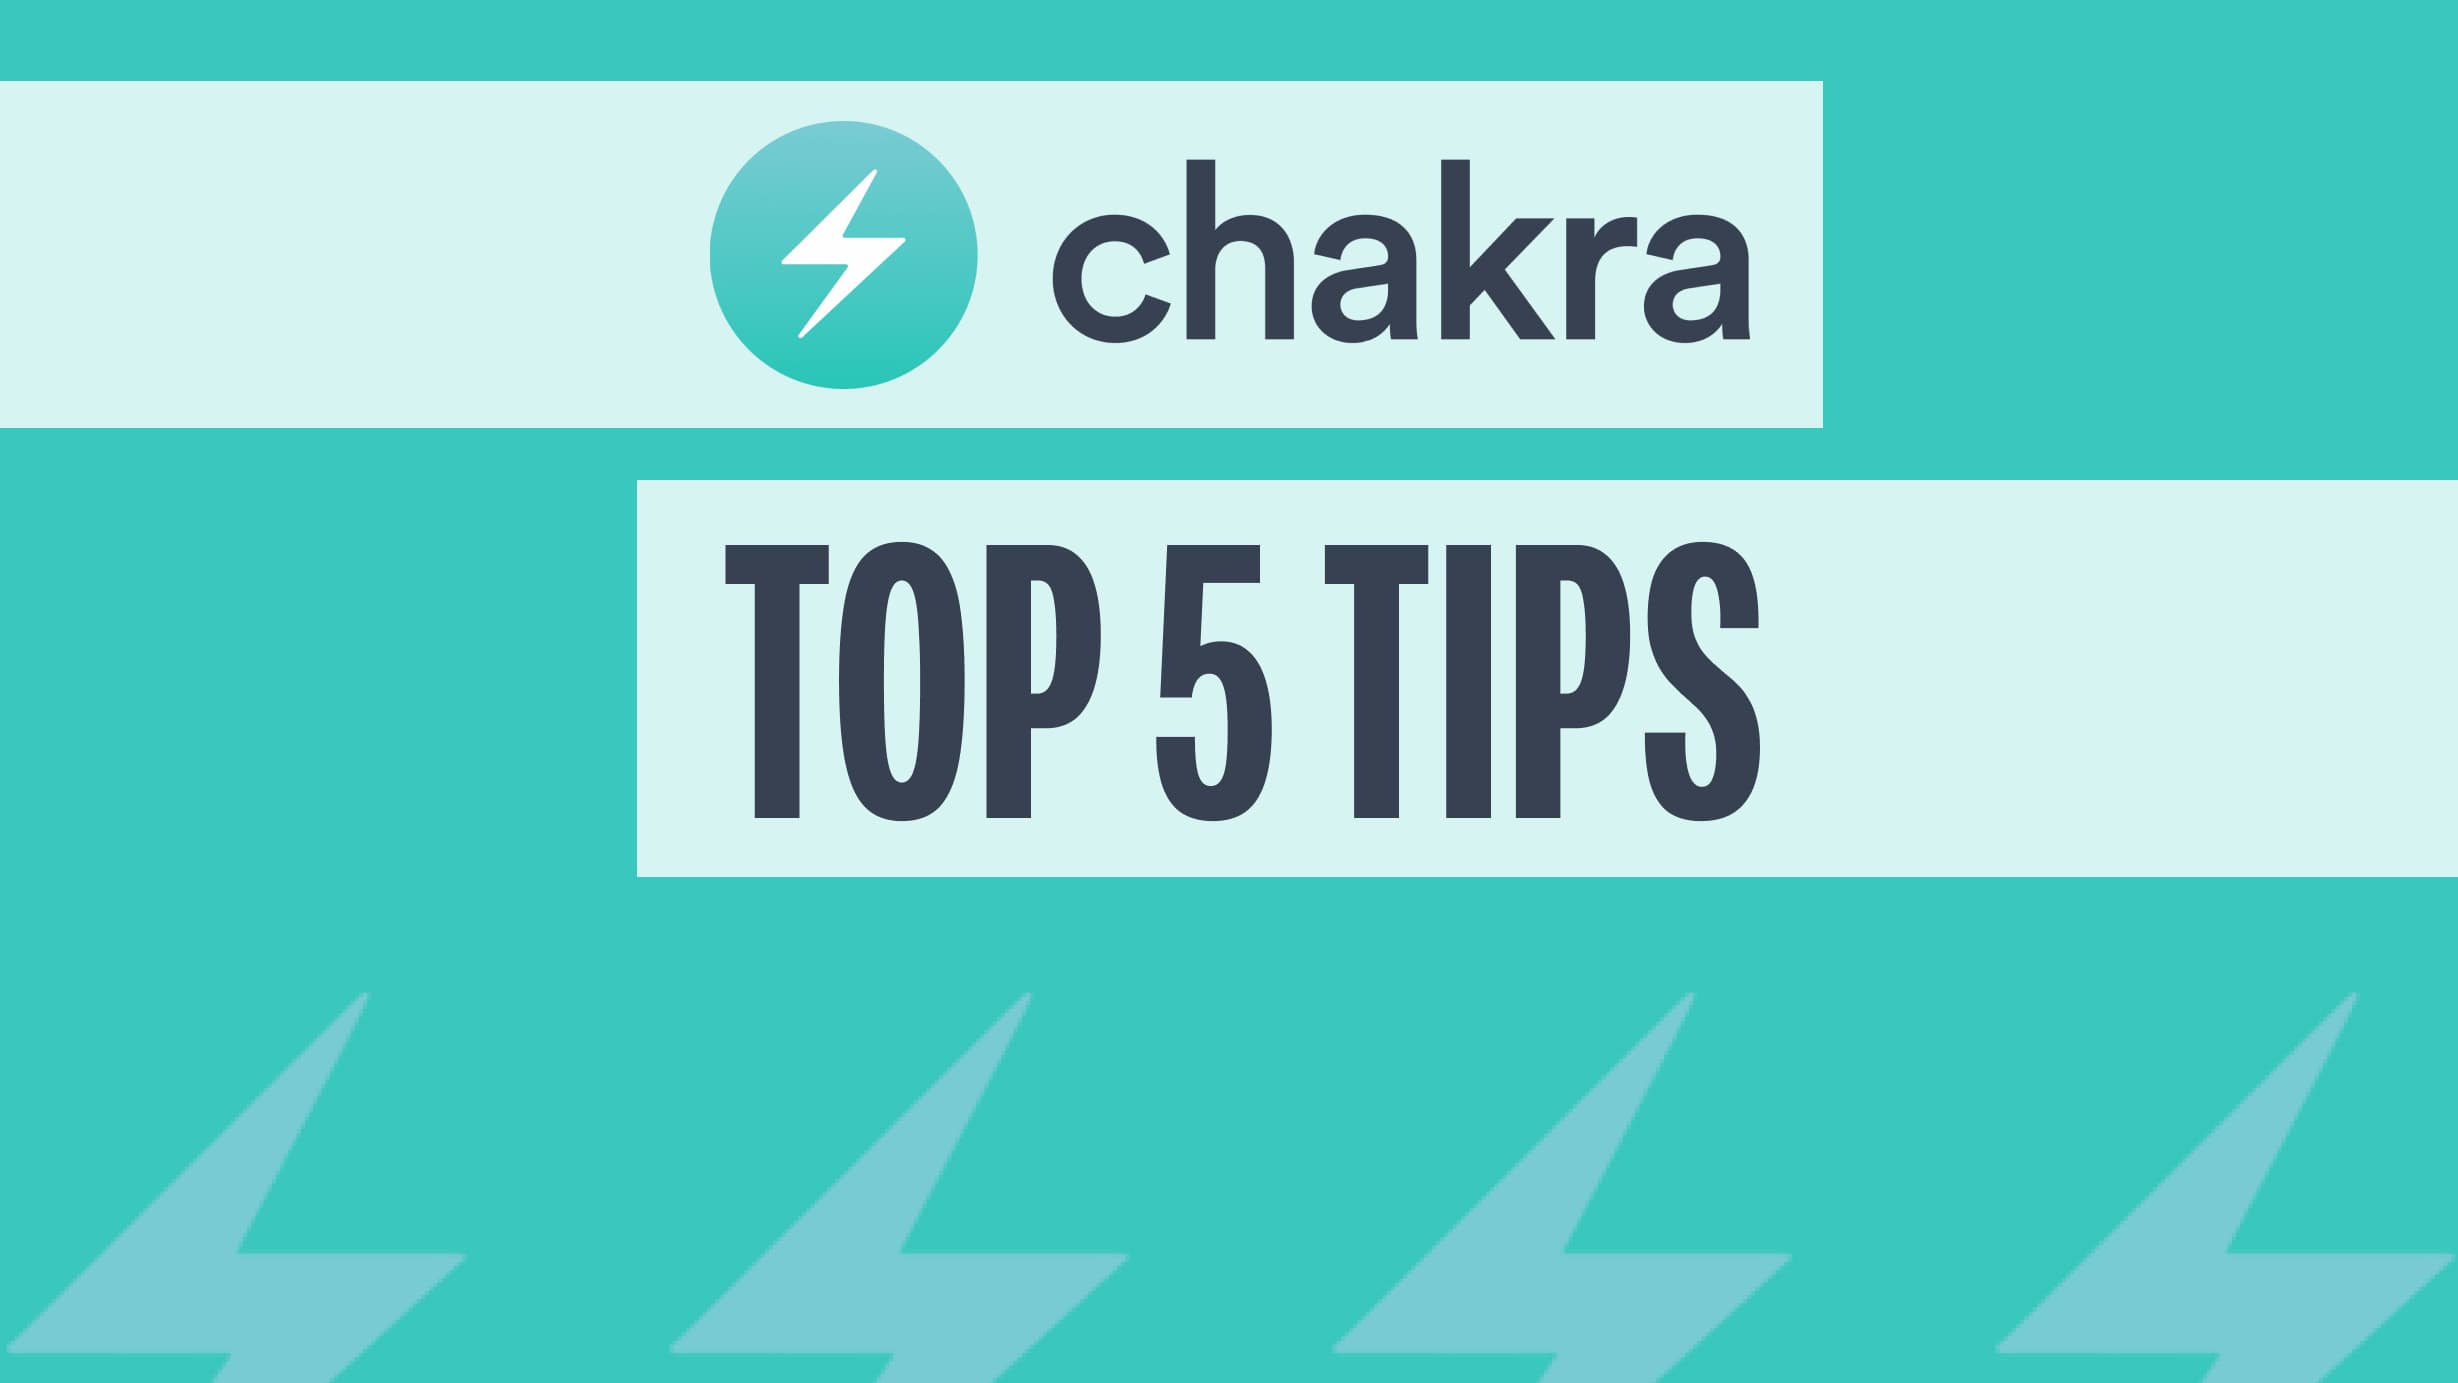 Chakra UI is a popular component library for building customizable React applications. It provides a solid foundation of reusable UI components that a